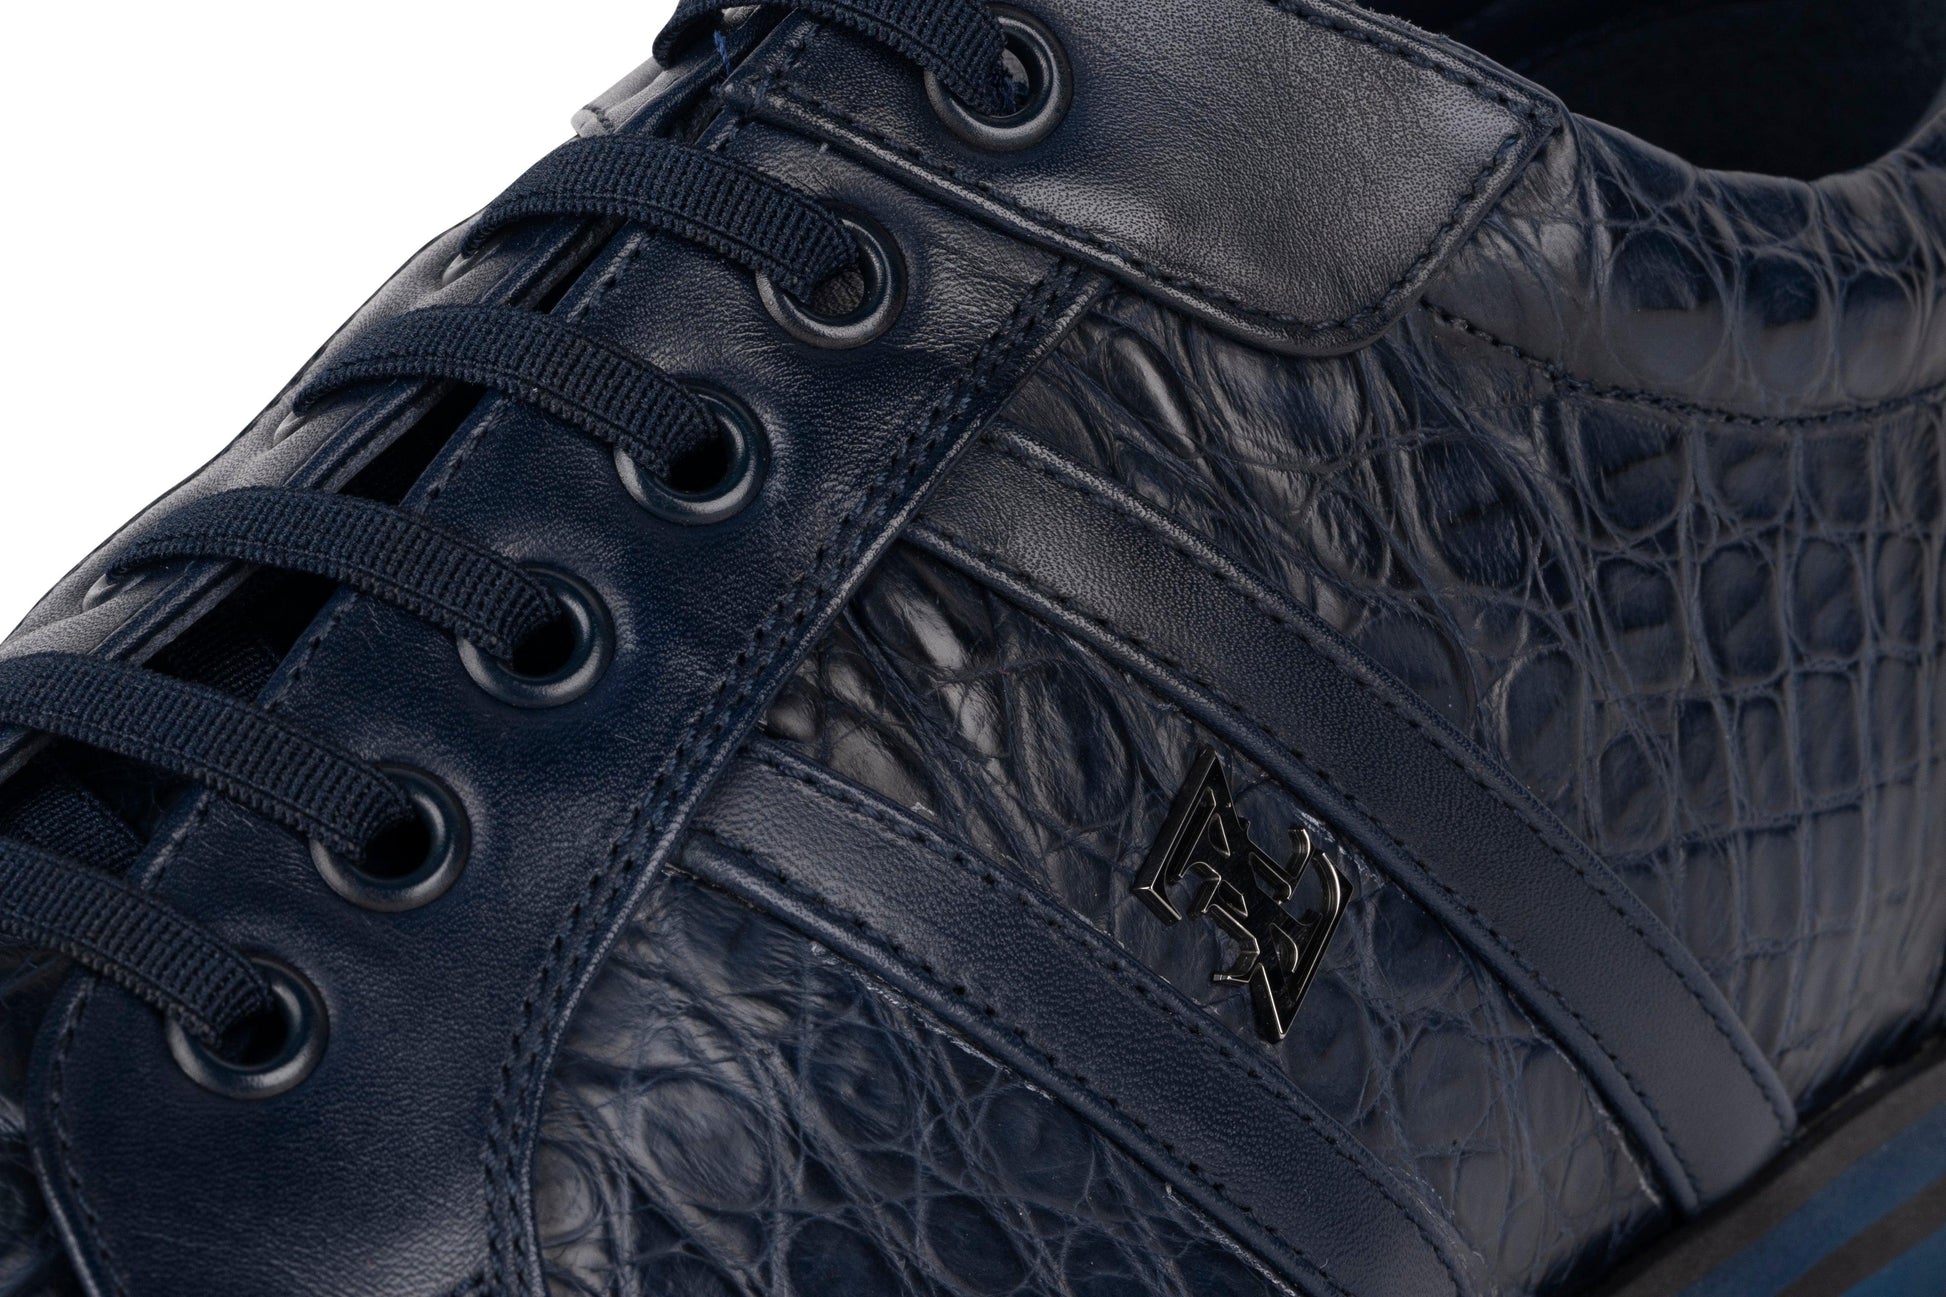 Navy blue sneakers in caiman and calfskin - ZILLI